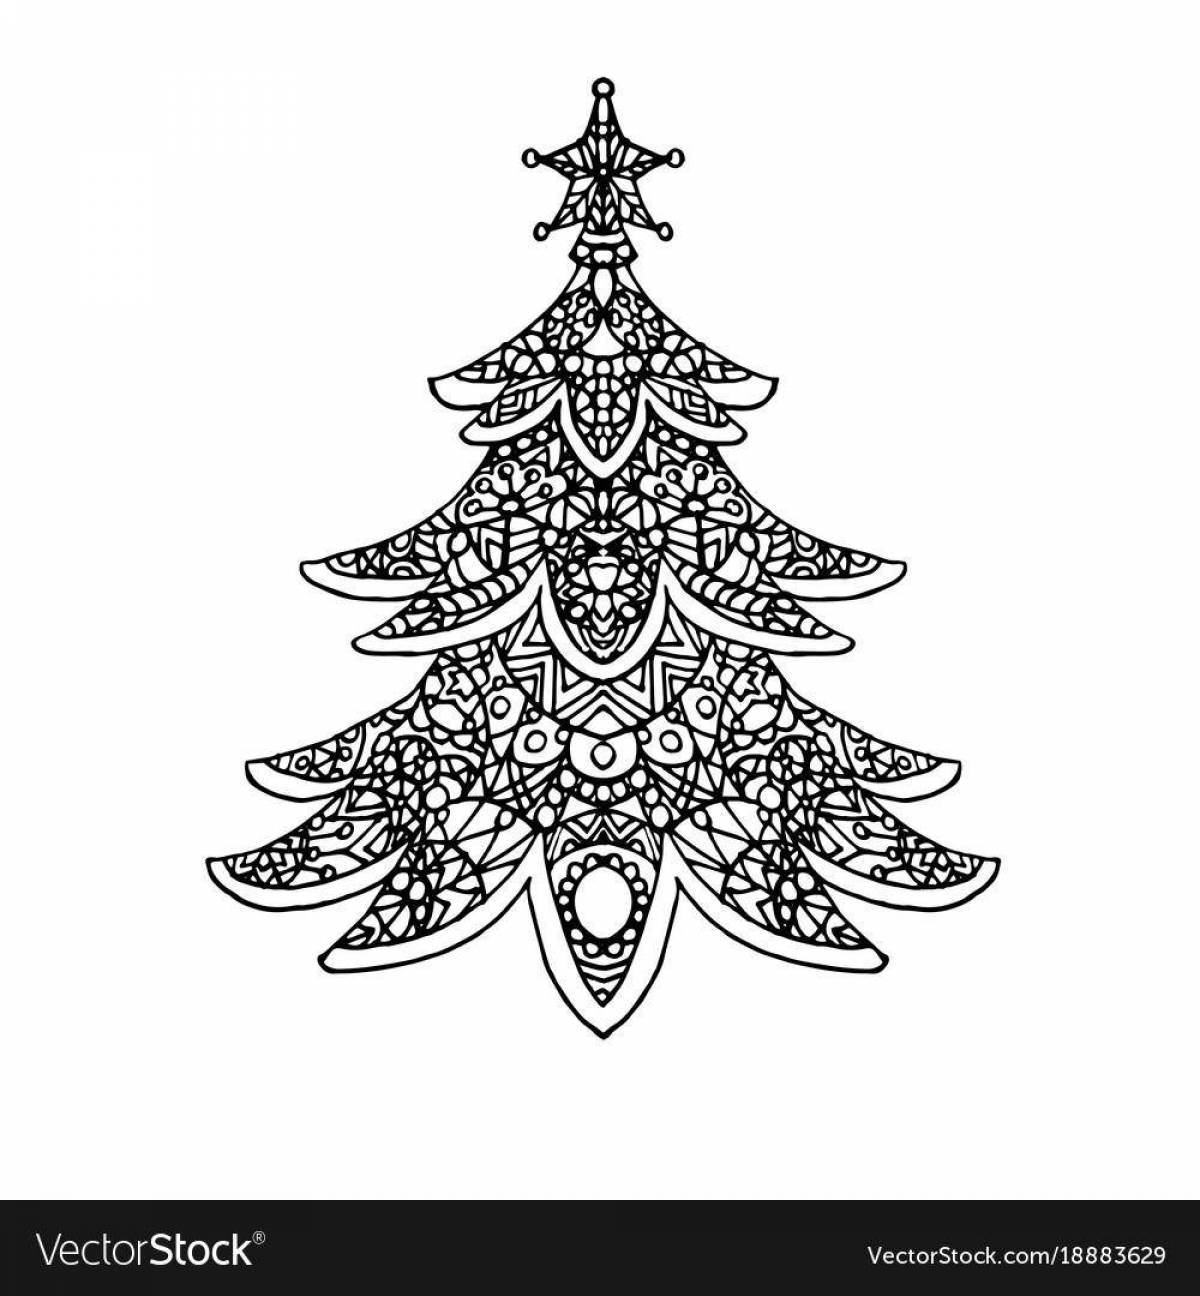 Giant palace tree coloring page